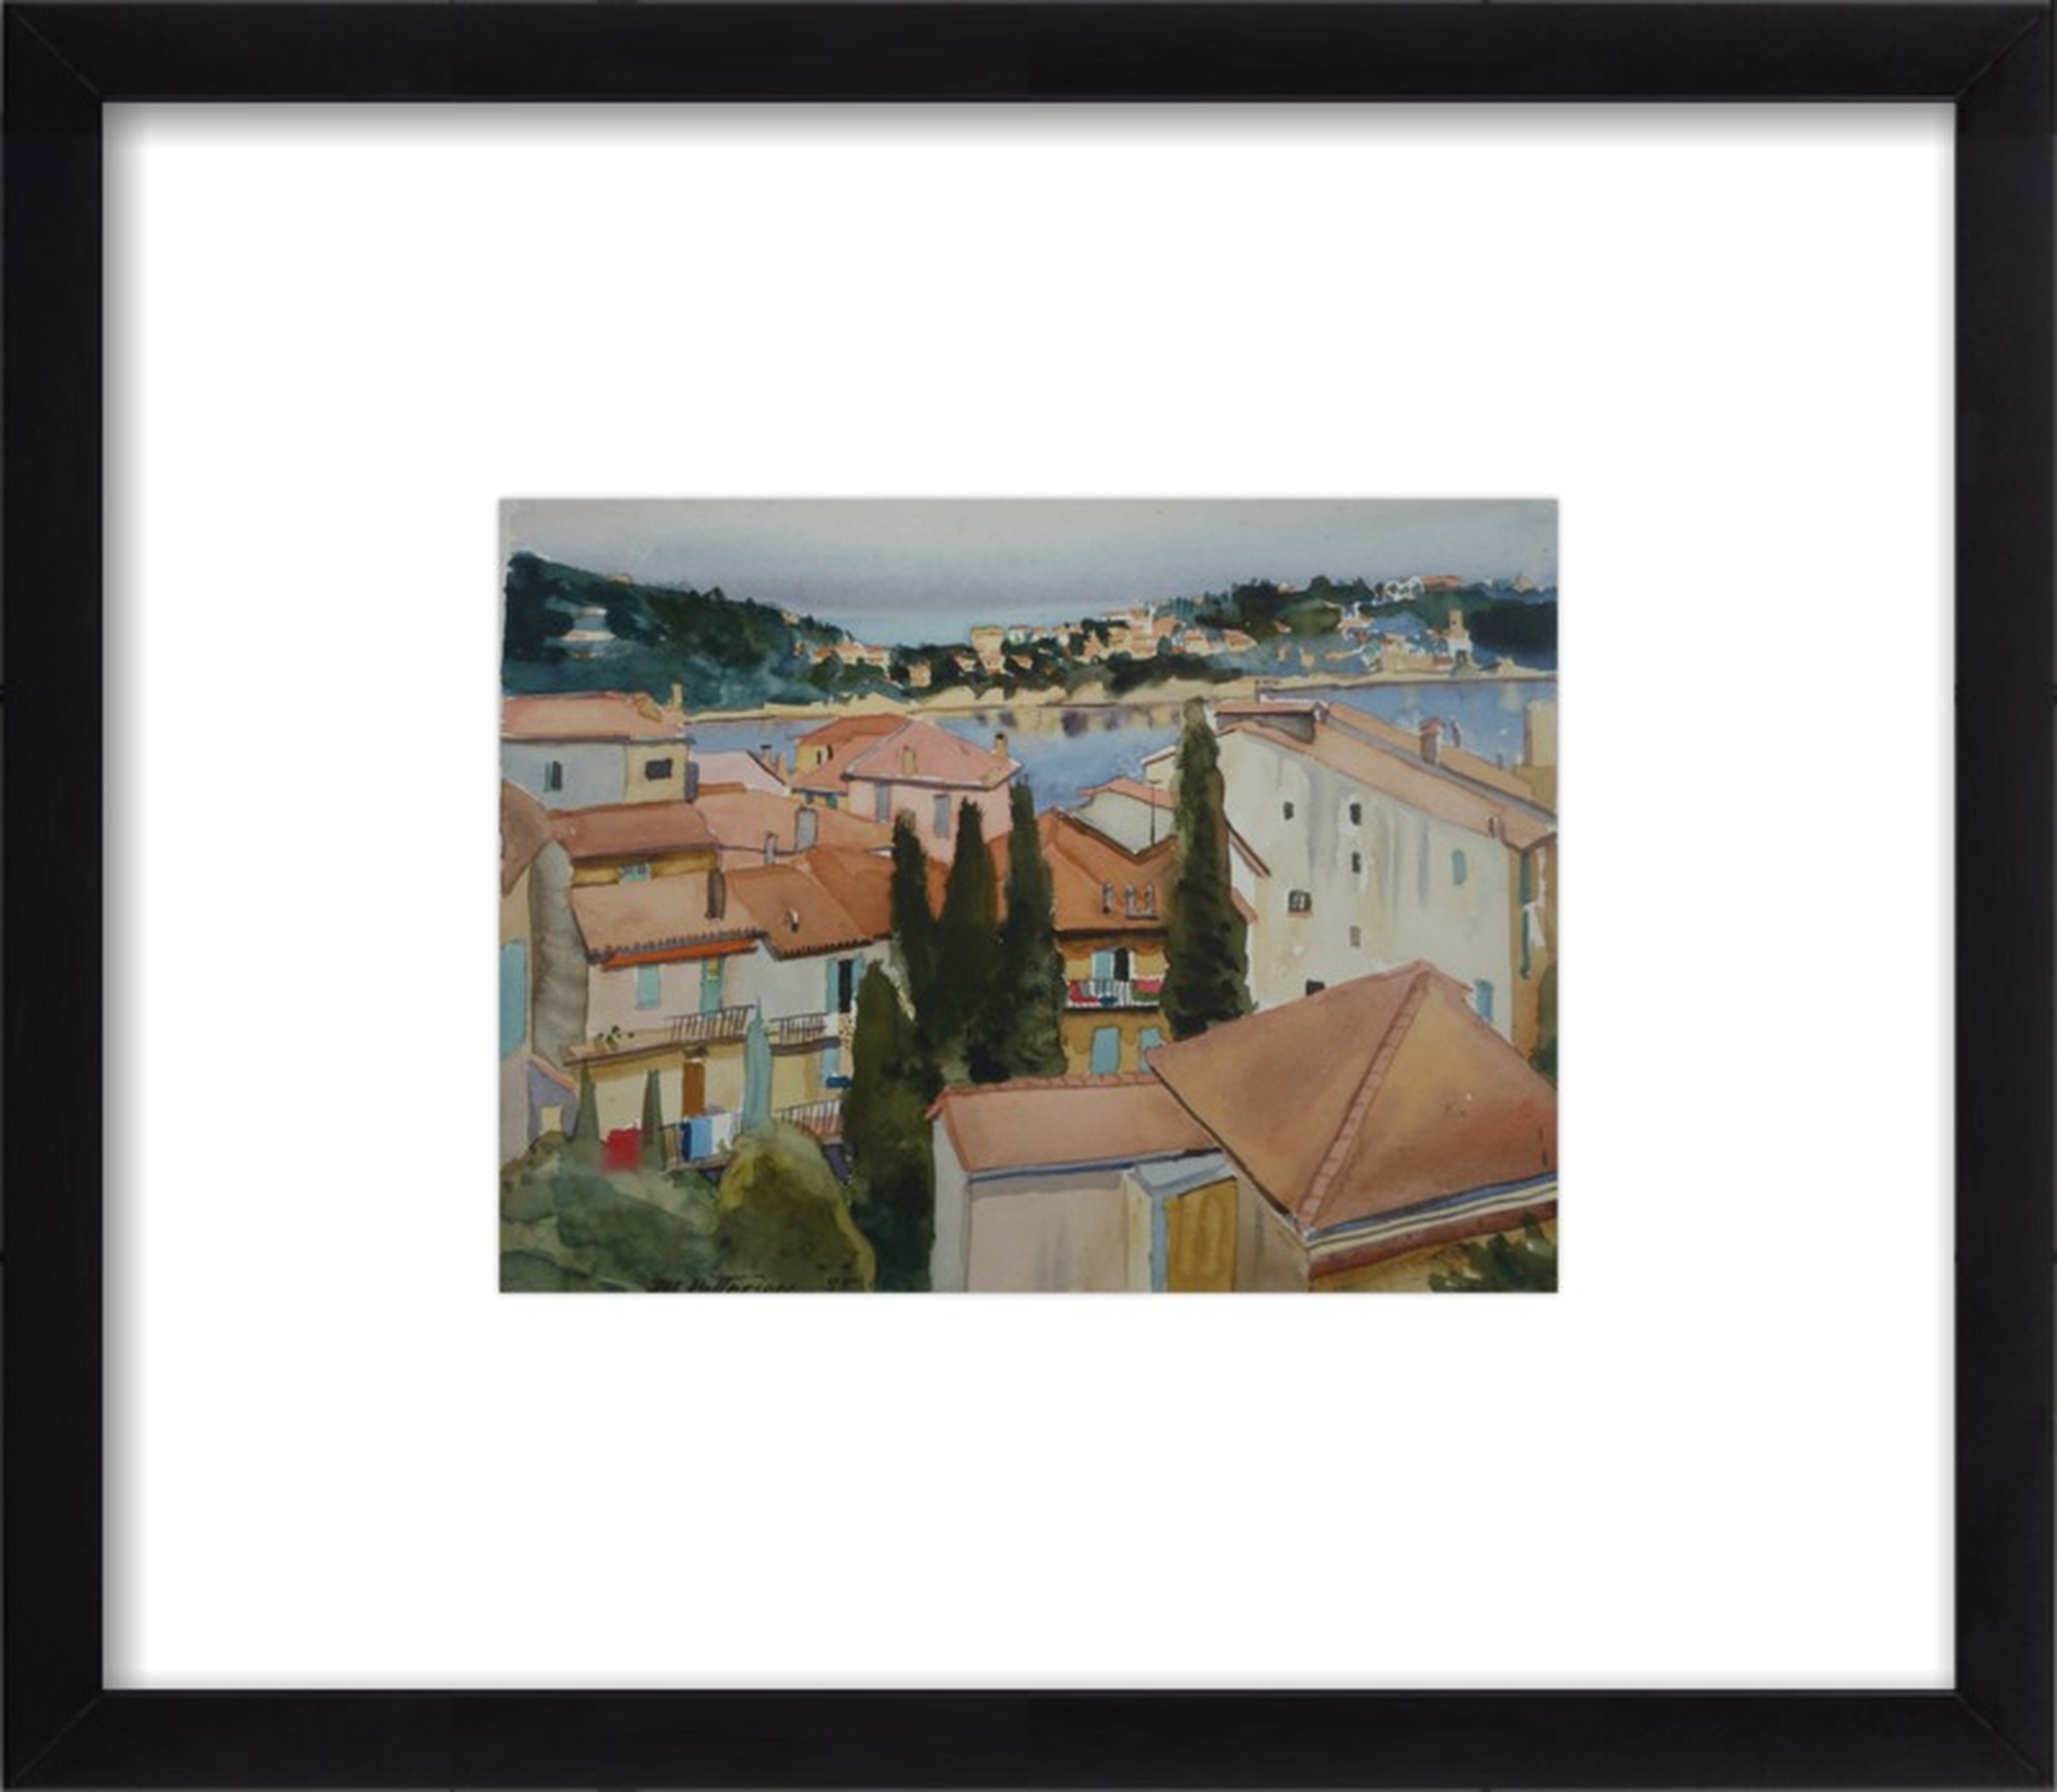 Ville Franche by Michael Patterson for Artfully Walls - Artfully Walls